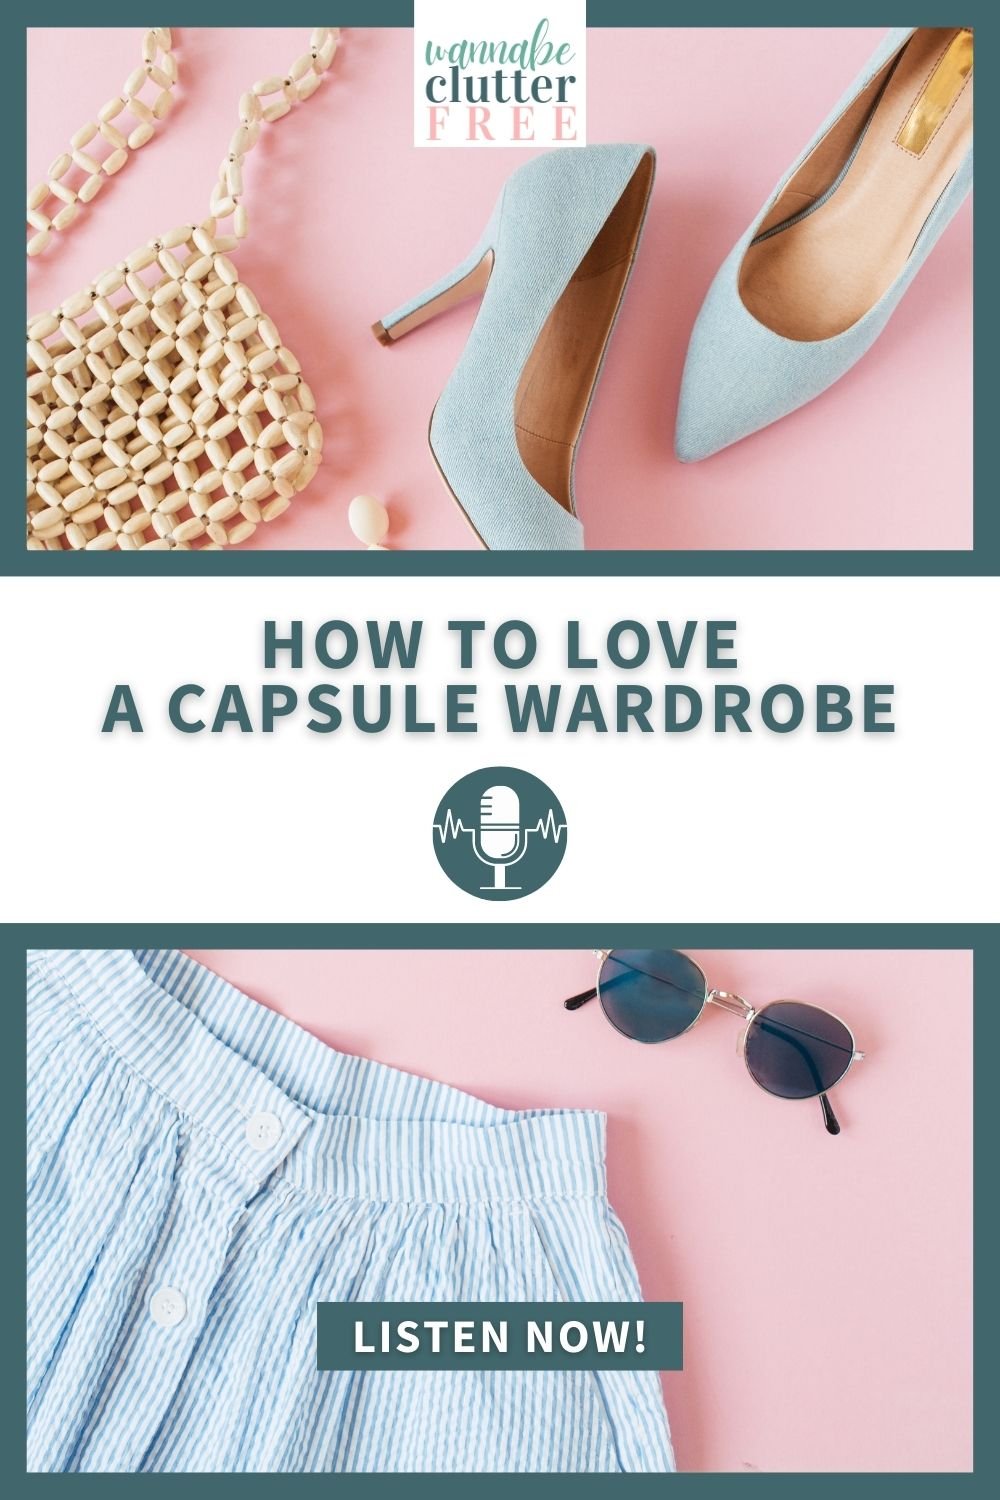 How to love a capsule wardrobe